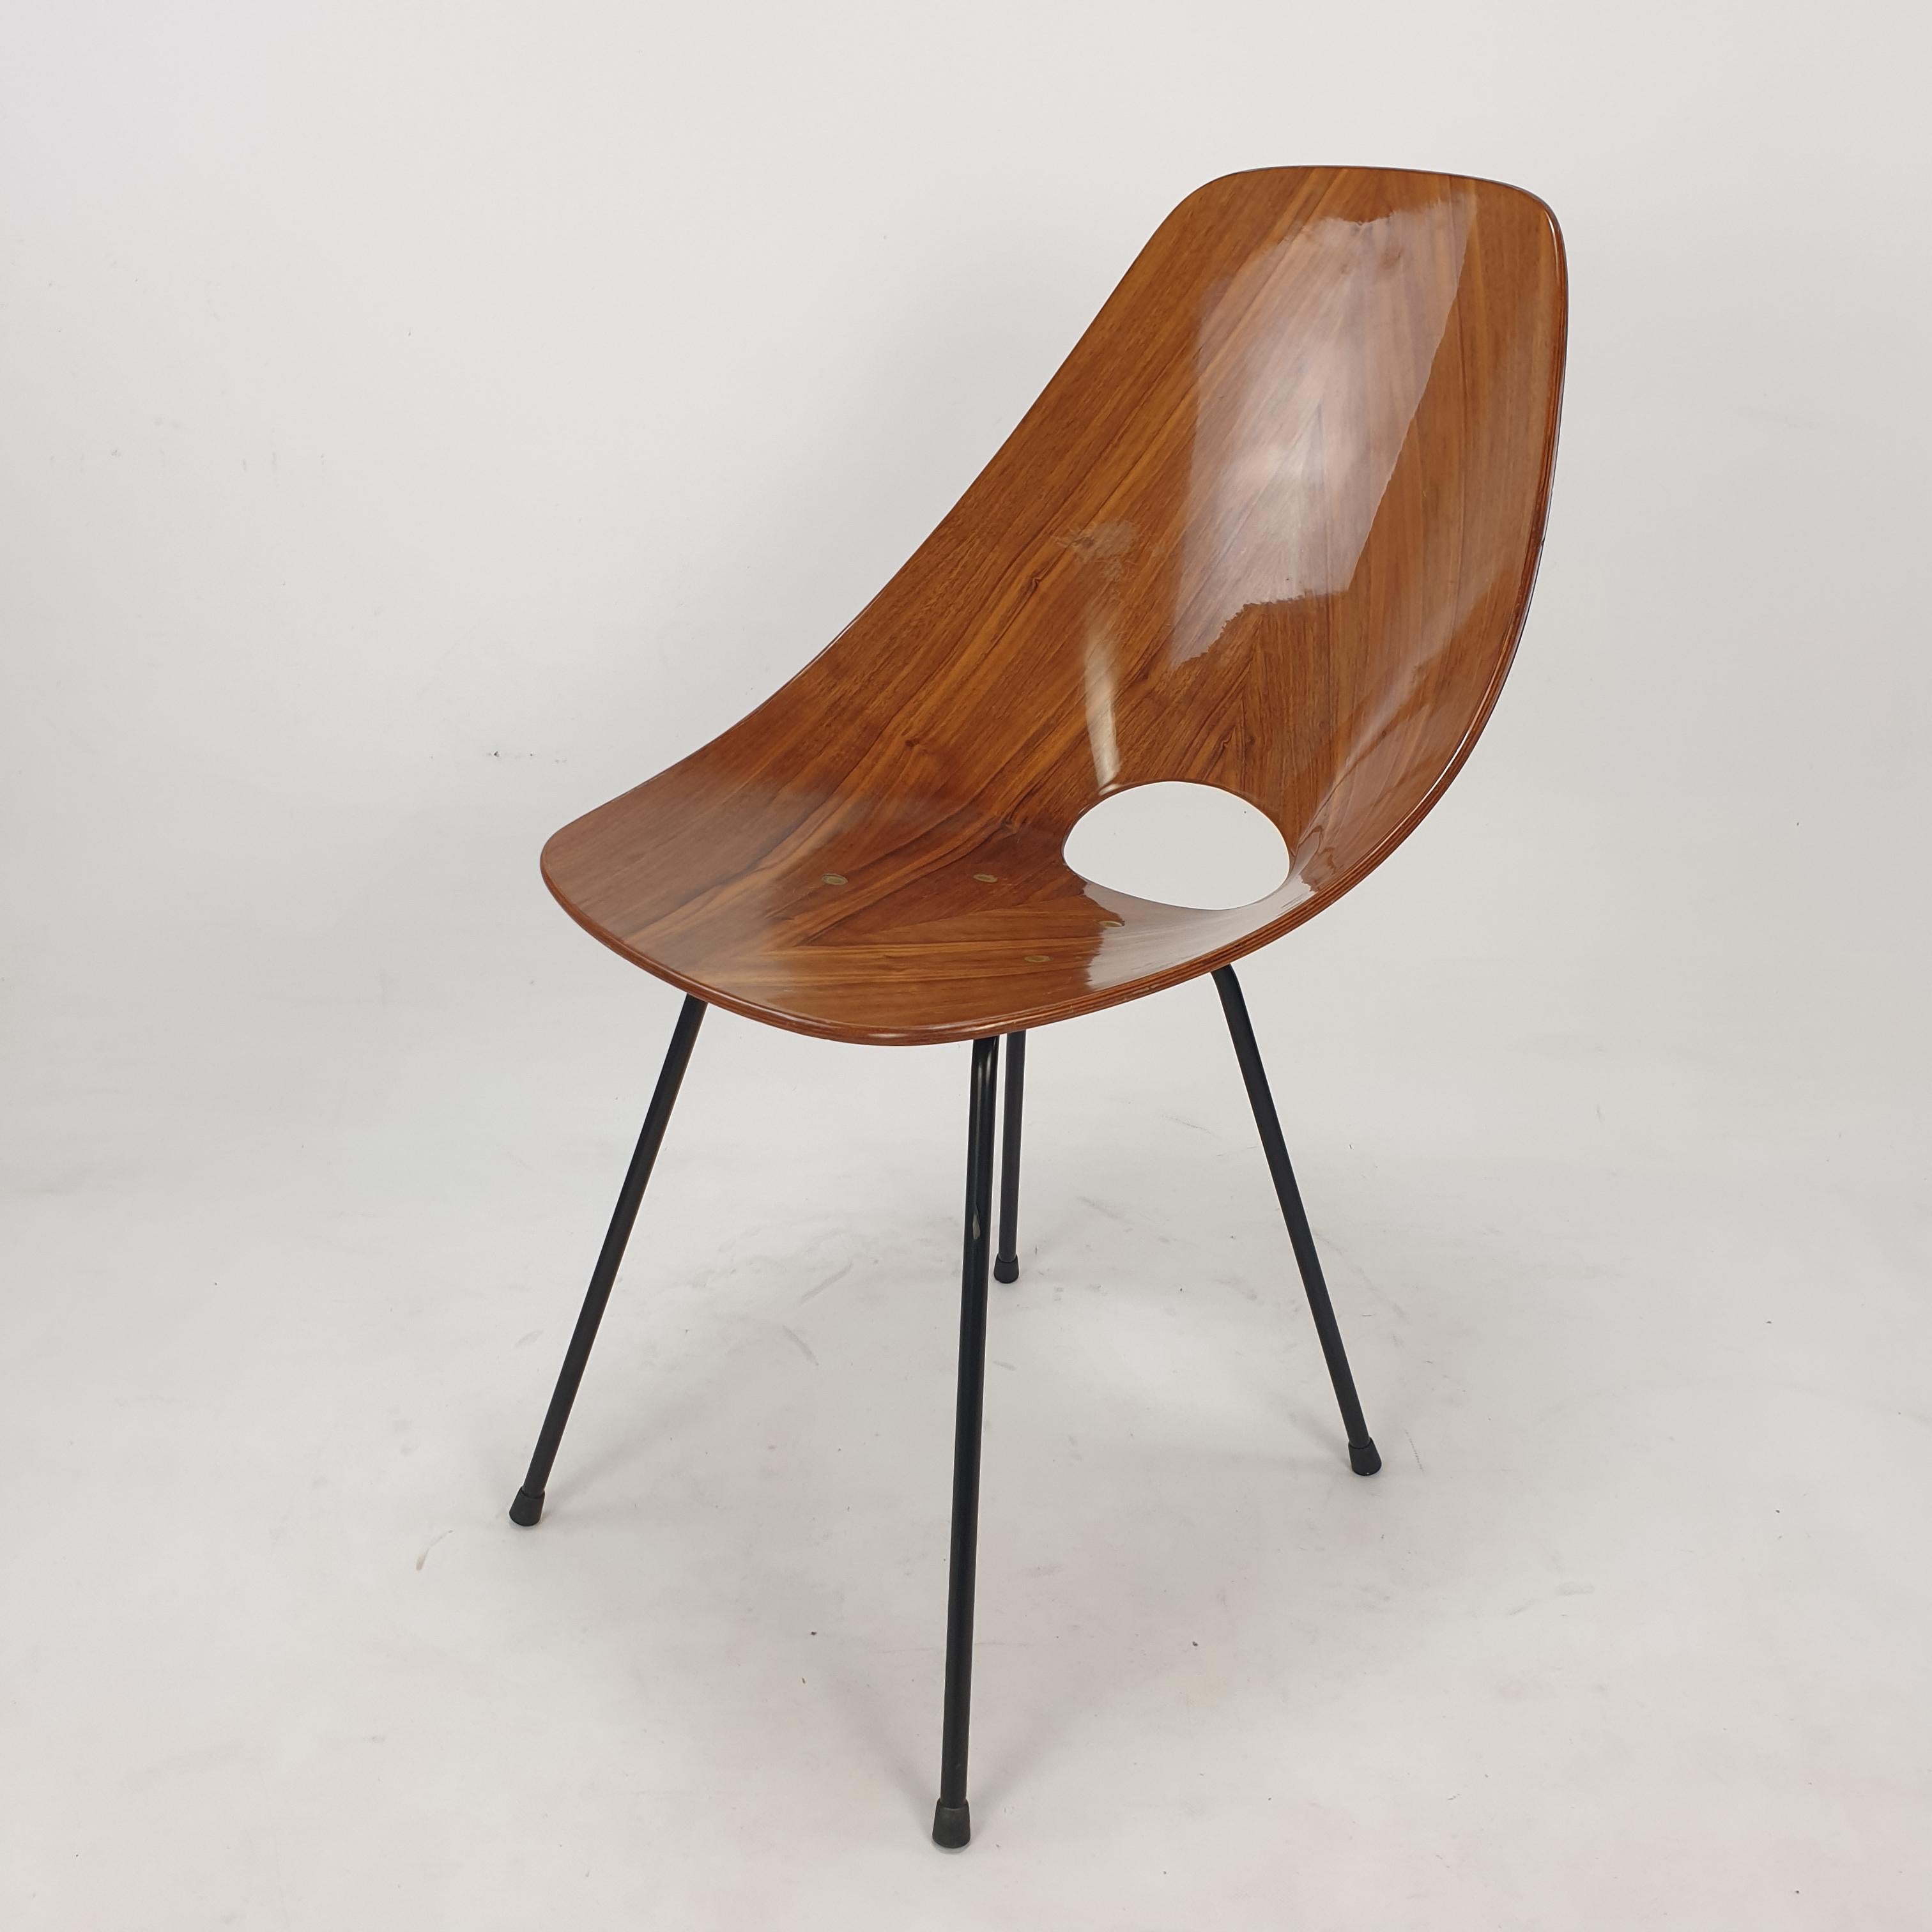 Beautiful Italian ‘Medea’ chair designed by Vittorio Nobili for Fratelli Tagliabue in 1955. 

Molded teak wood seat supported by black steel legs, accented with brass hardware. 

A perfect representation of the organic modern style. 
The